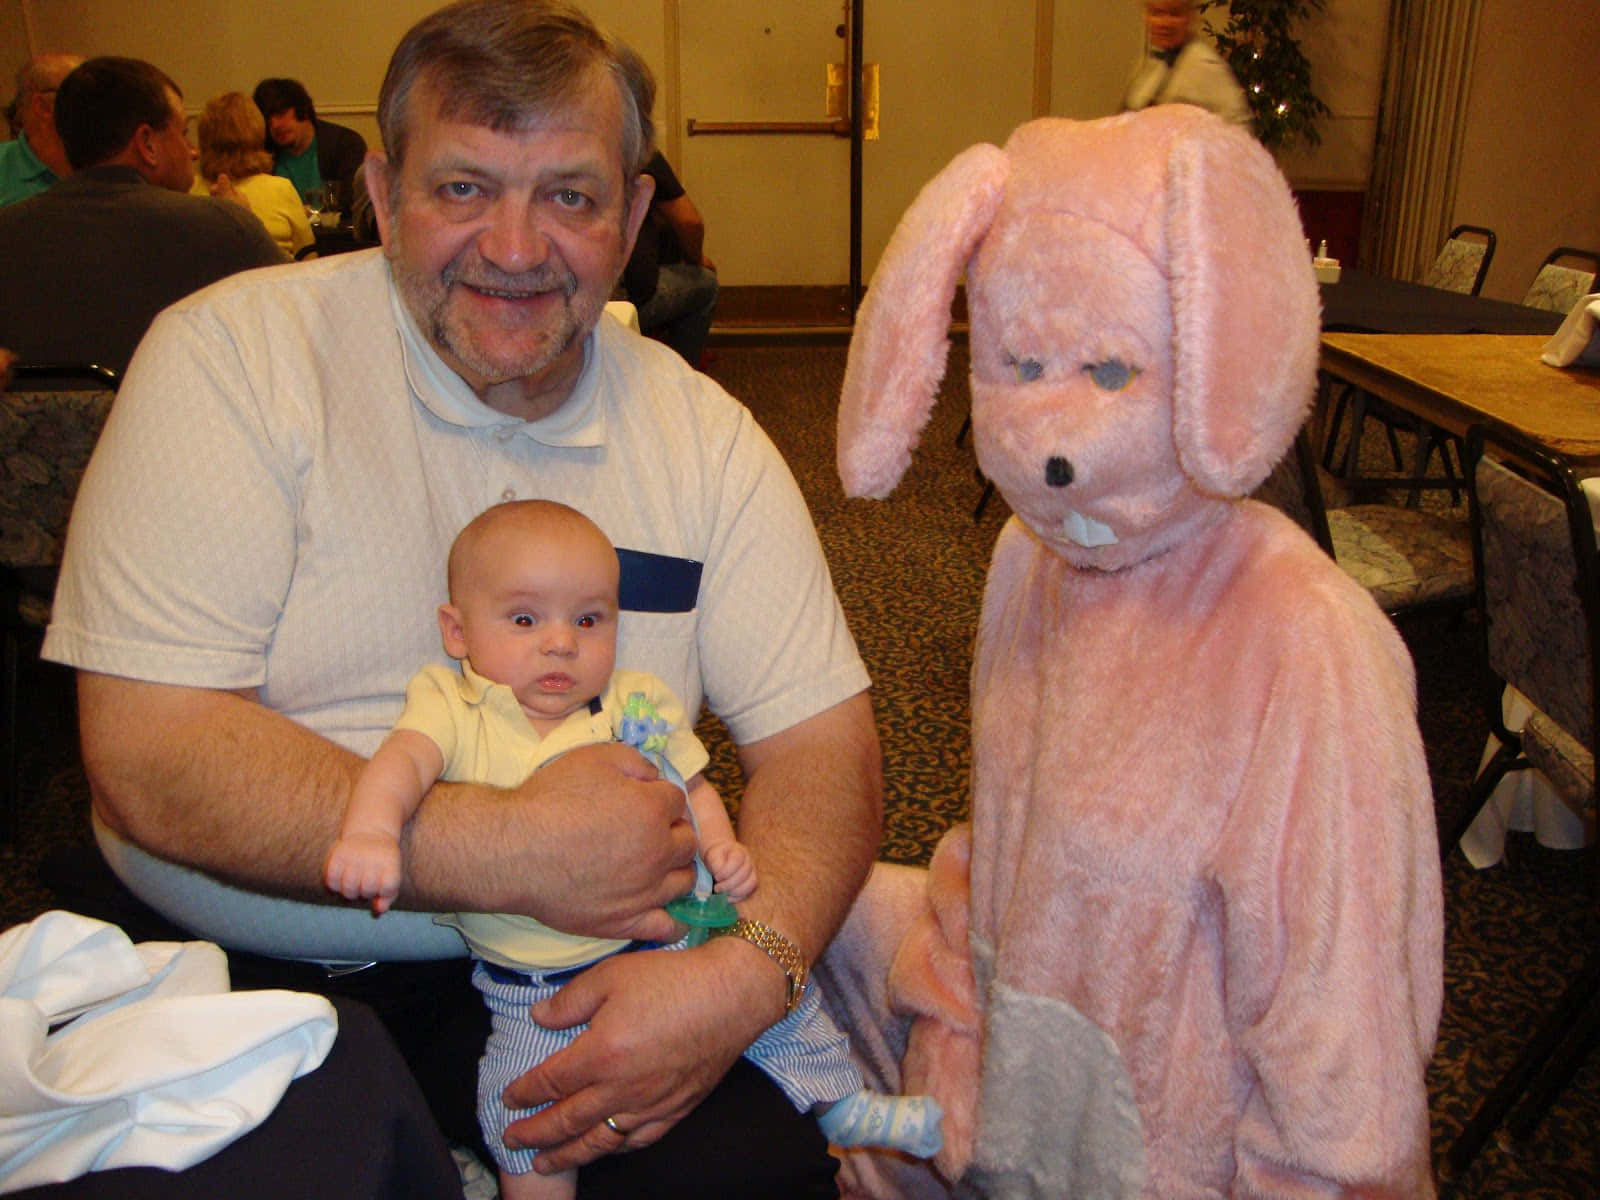 Man In A Bunny Costume